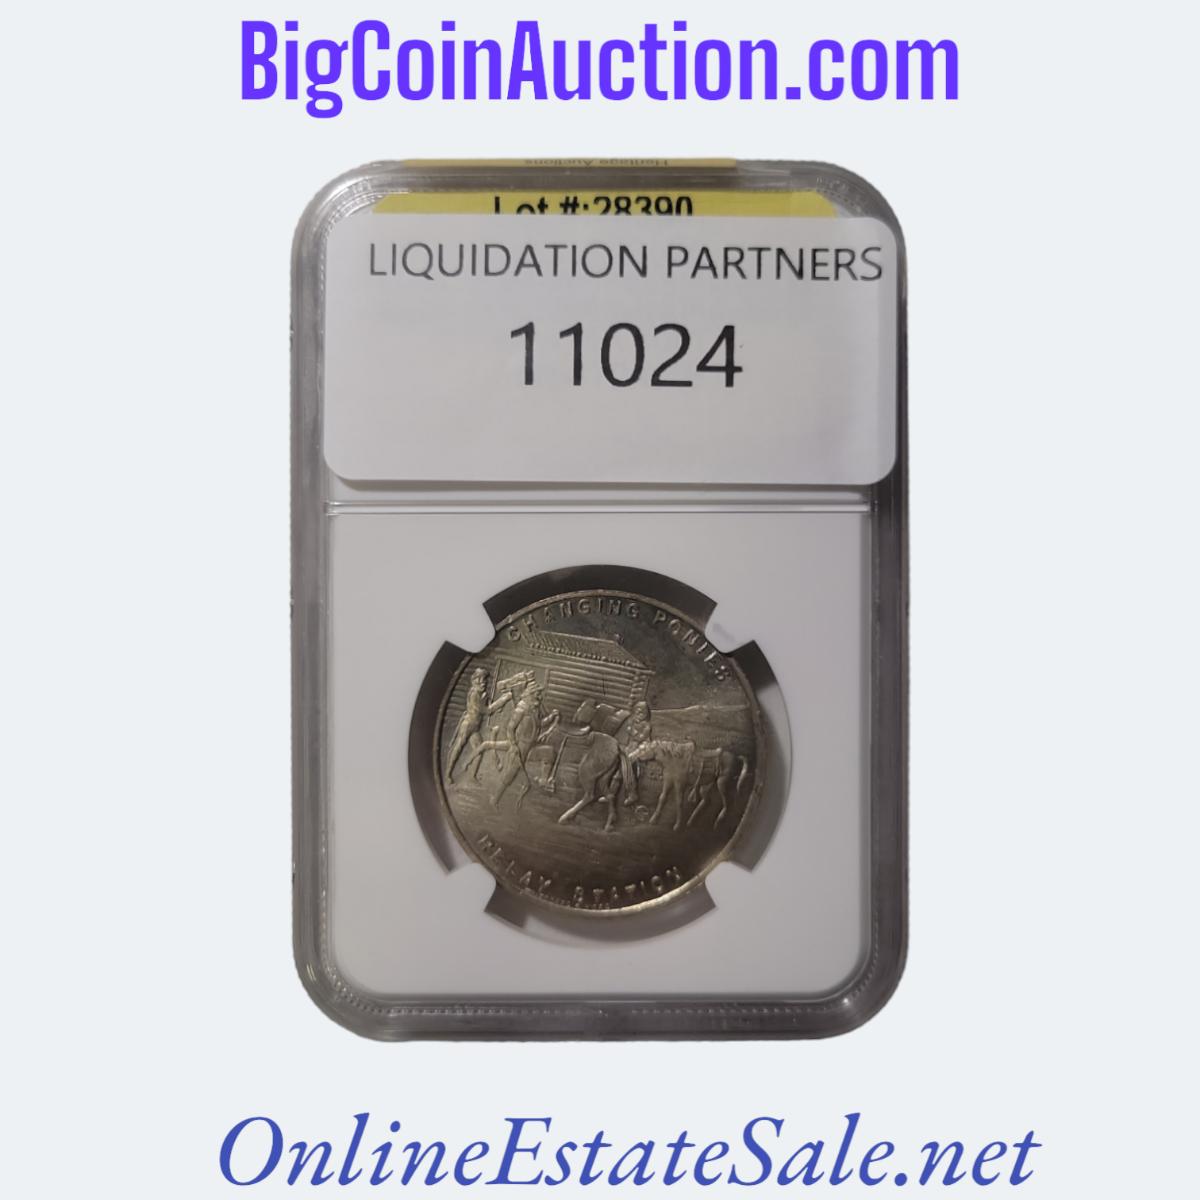 SILVER BULLION - 999 PURE SILVER - FOR SALE - general for sale - by owner -  craigslist